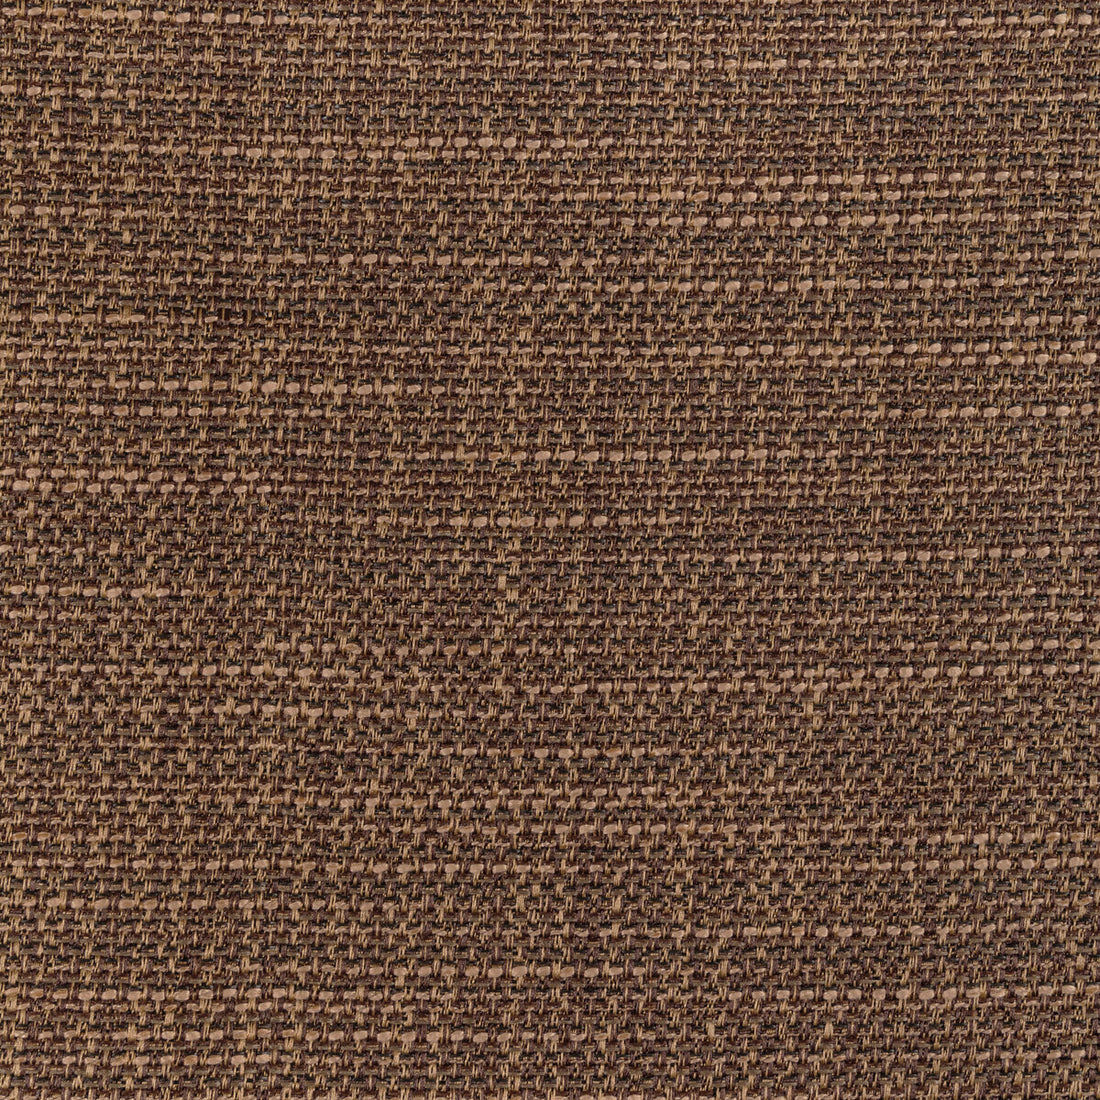 Luma Texture fabric in tortoise color - pattern 4947.606.0 - by Kravet Contract in the Fr Window Luma Texture collection